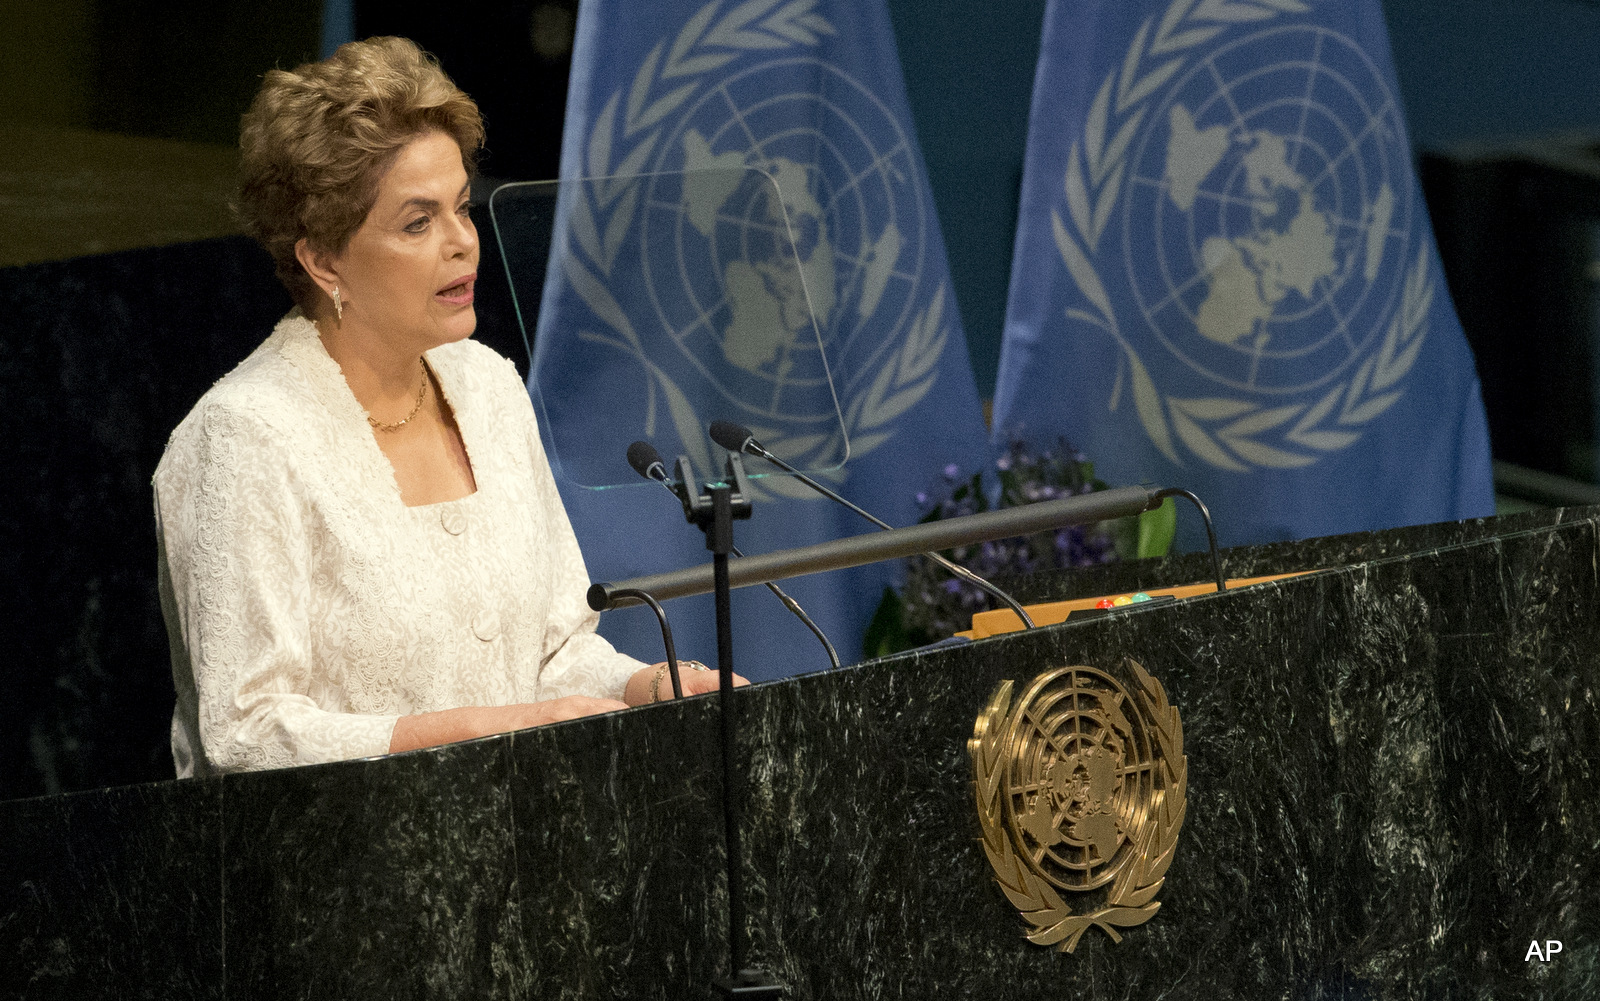 Brazilian President Dilma Rousseff speaks during the Paris Agreement on climate change ceremony, Friday, April 22, 2016 at U.N. headquarters.